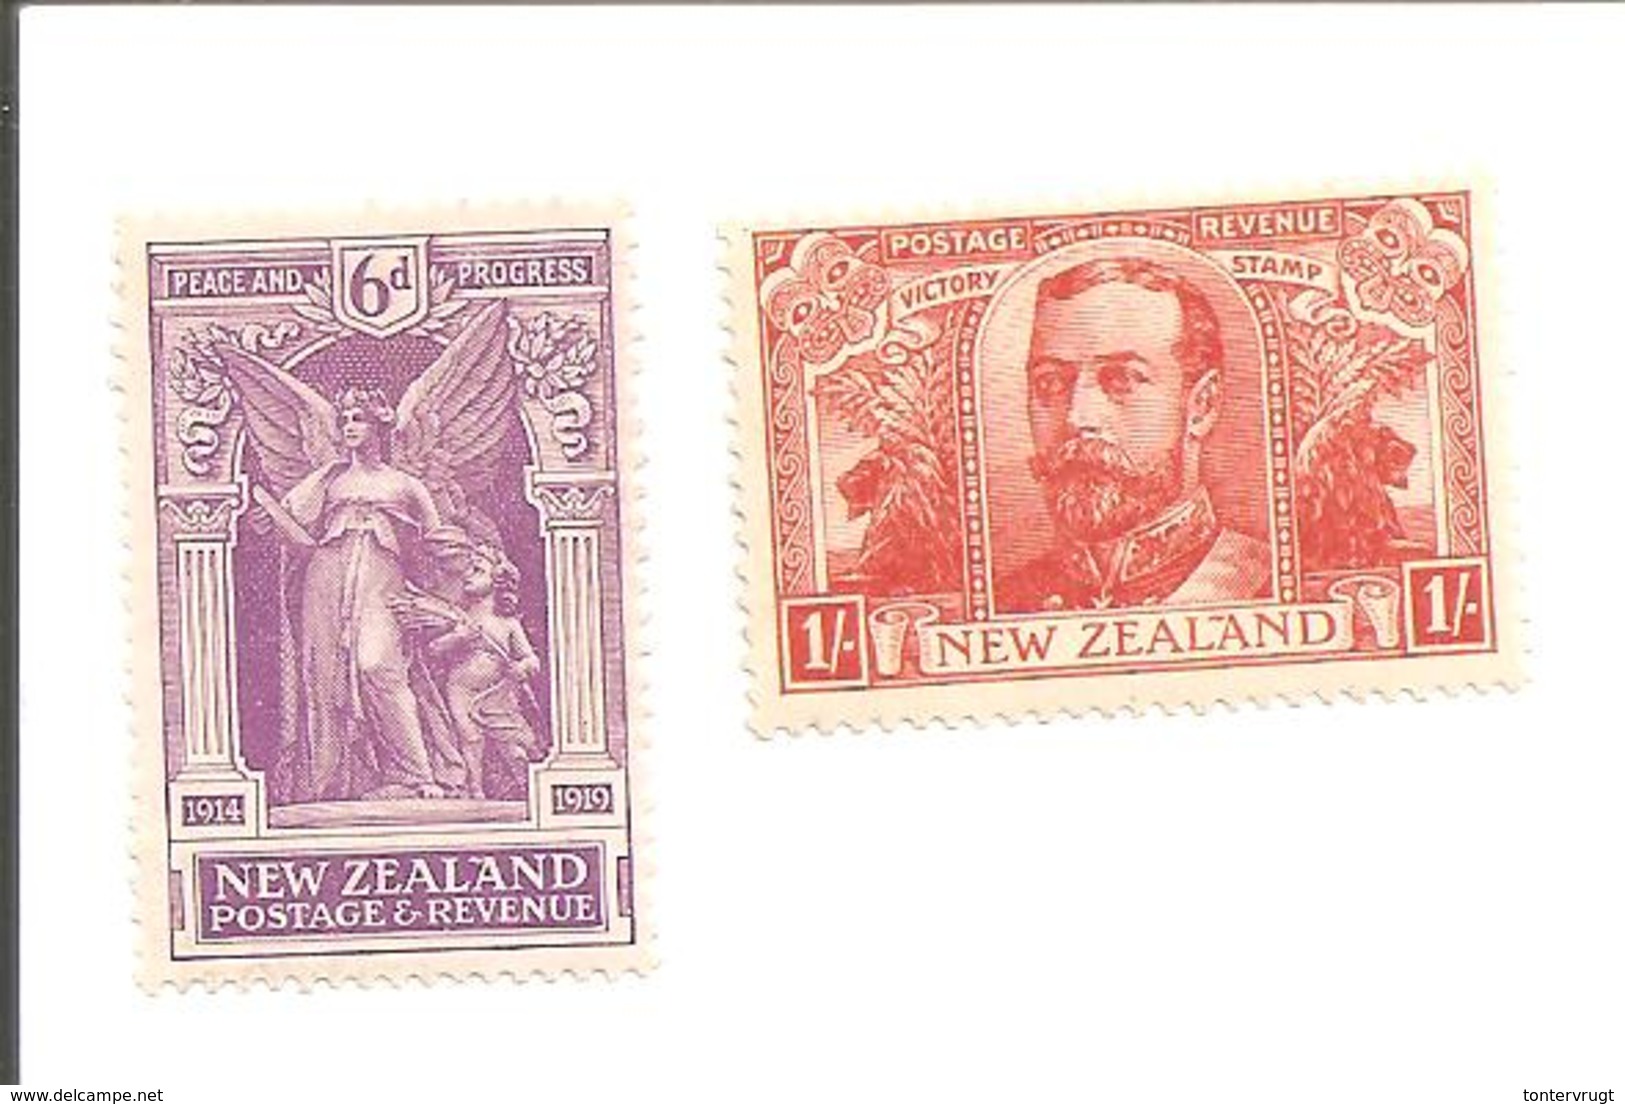 New Zealand 1920 Peace And Progress 6d Mint (x) + Victory Stamp 1/- Mint  (x) Very Nice - Neufs